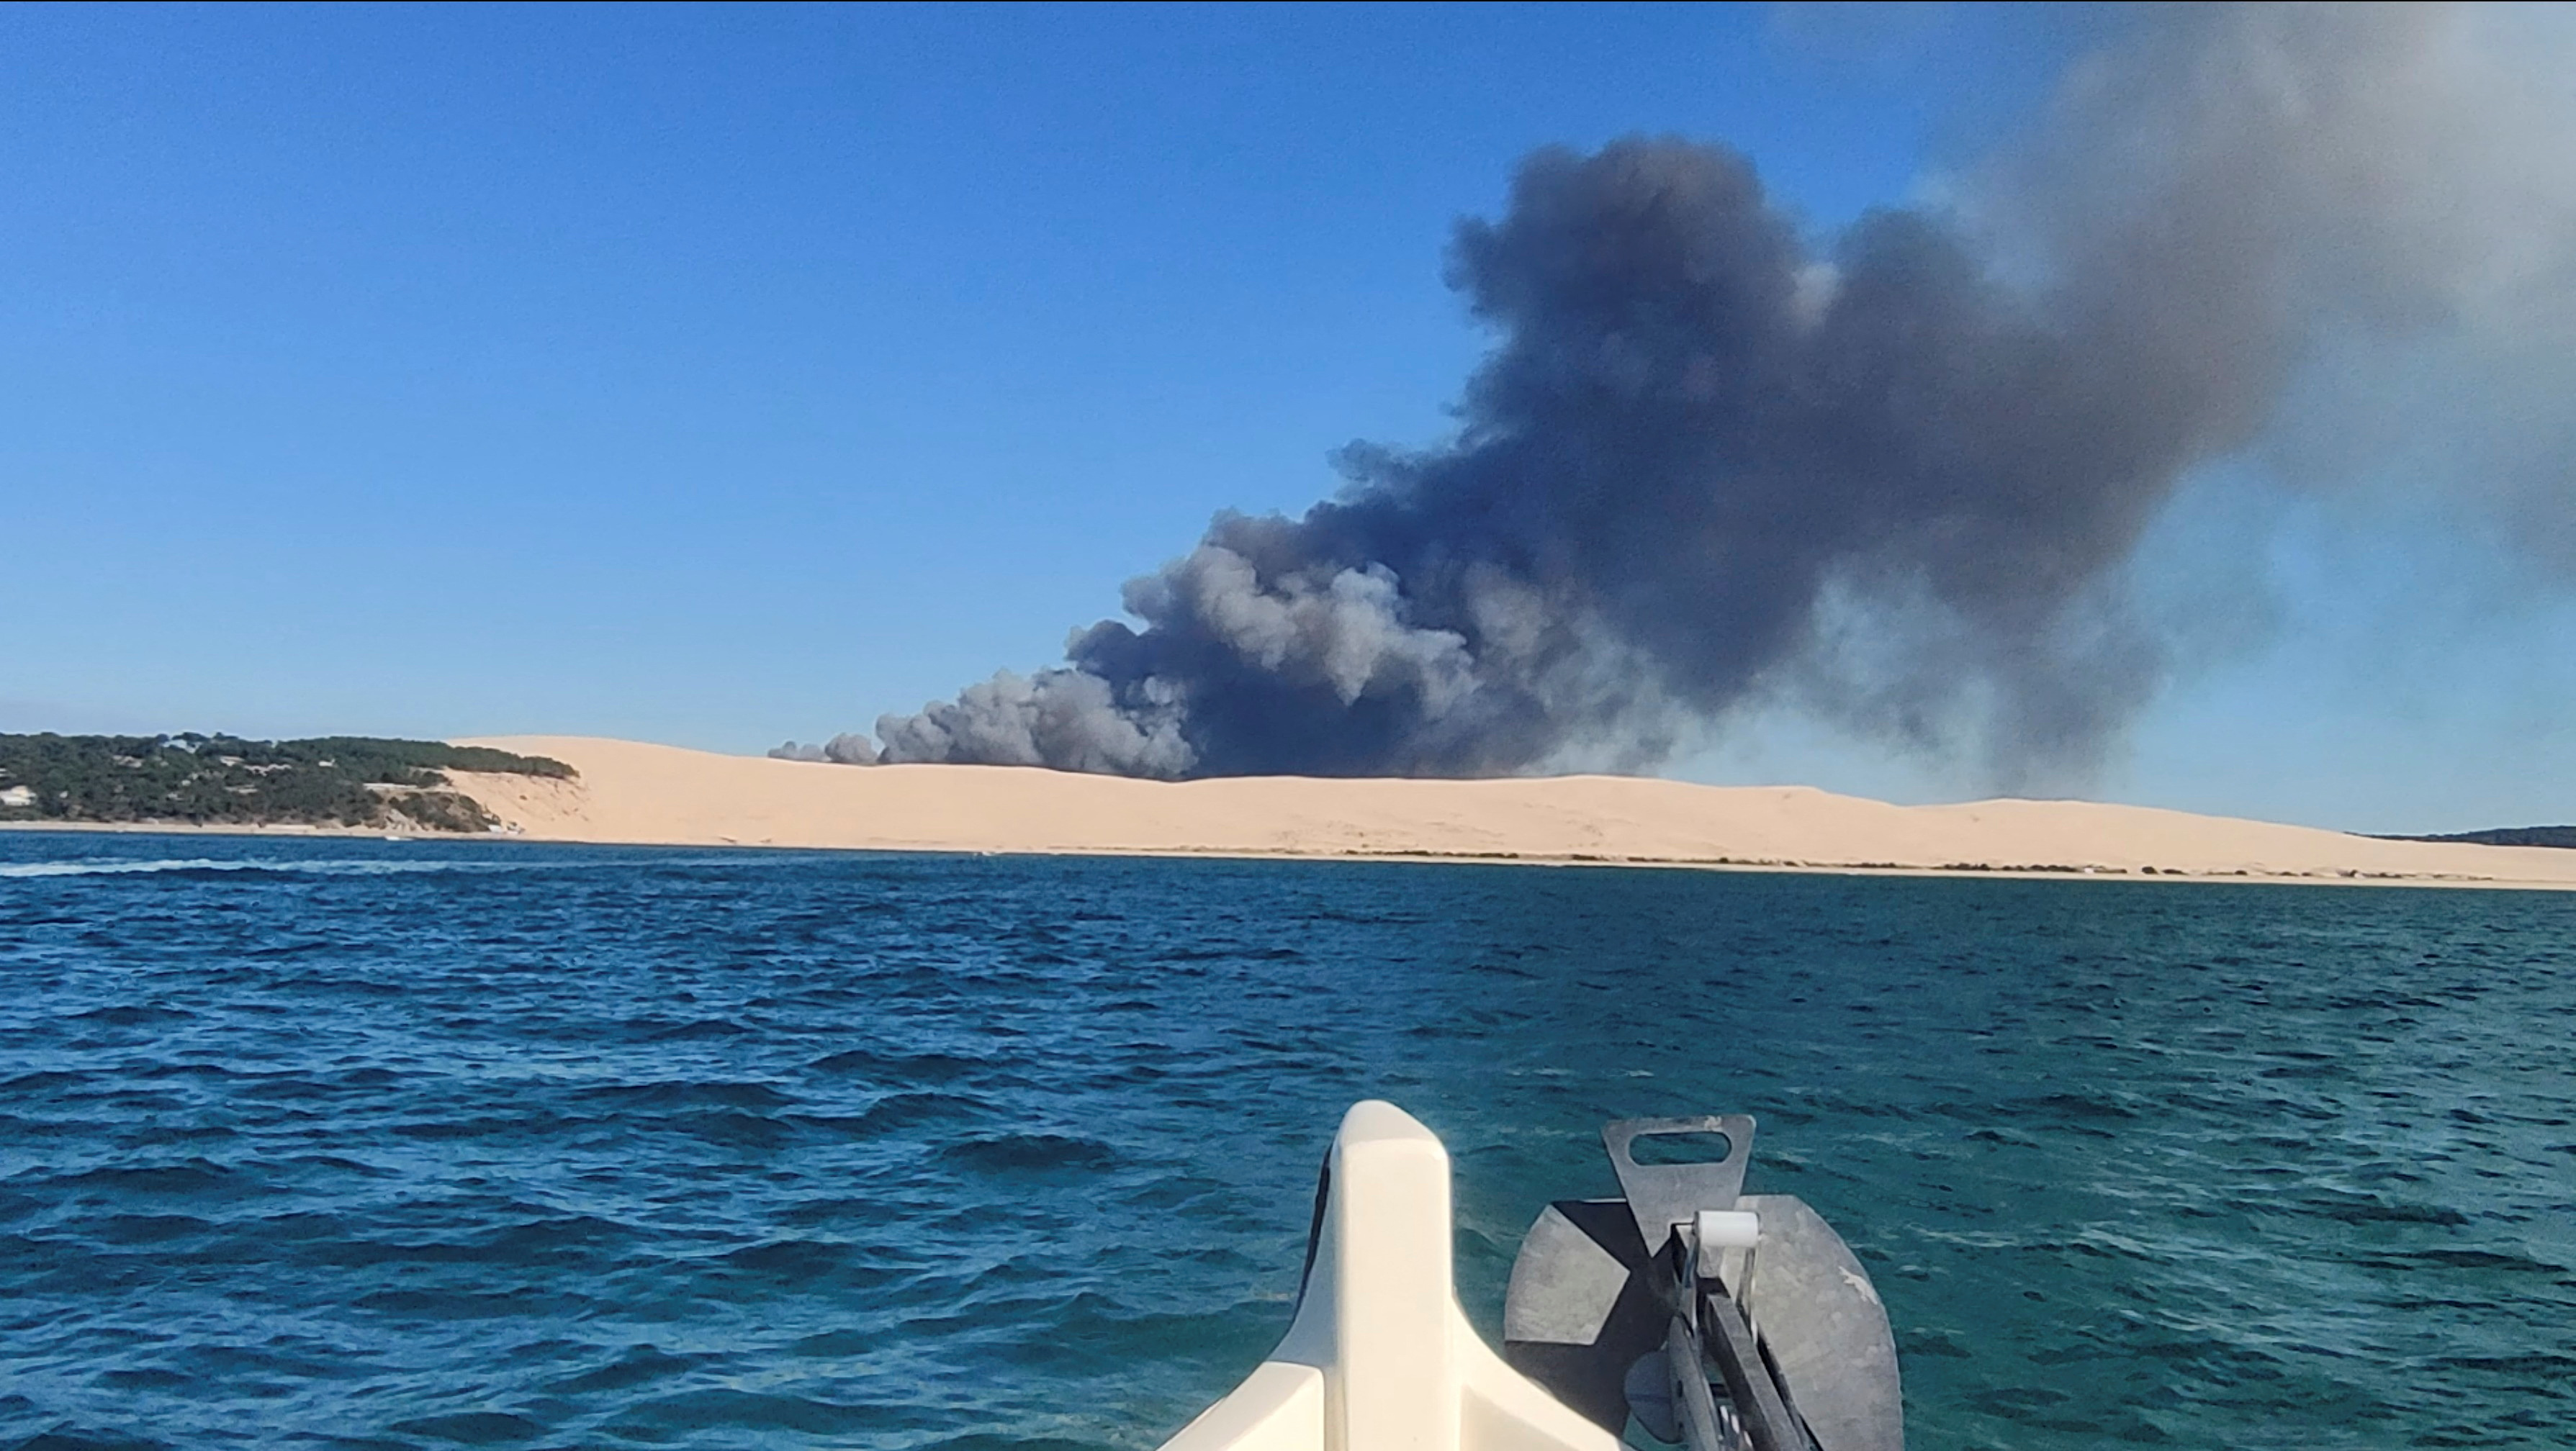 A general view shows smoke rising from the Gironde forest fires as seen from Dune de Pilat, Arcachon Bay